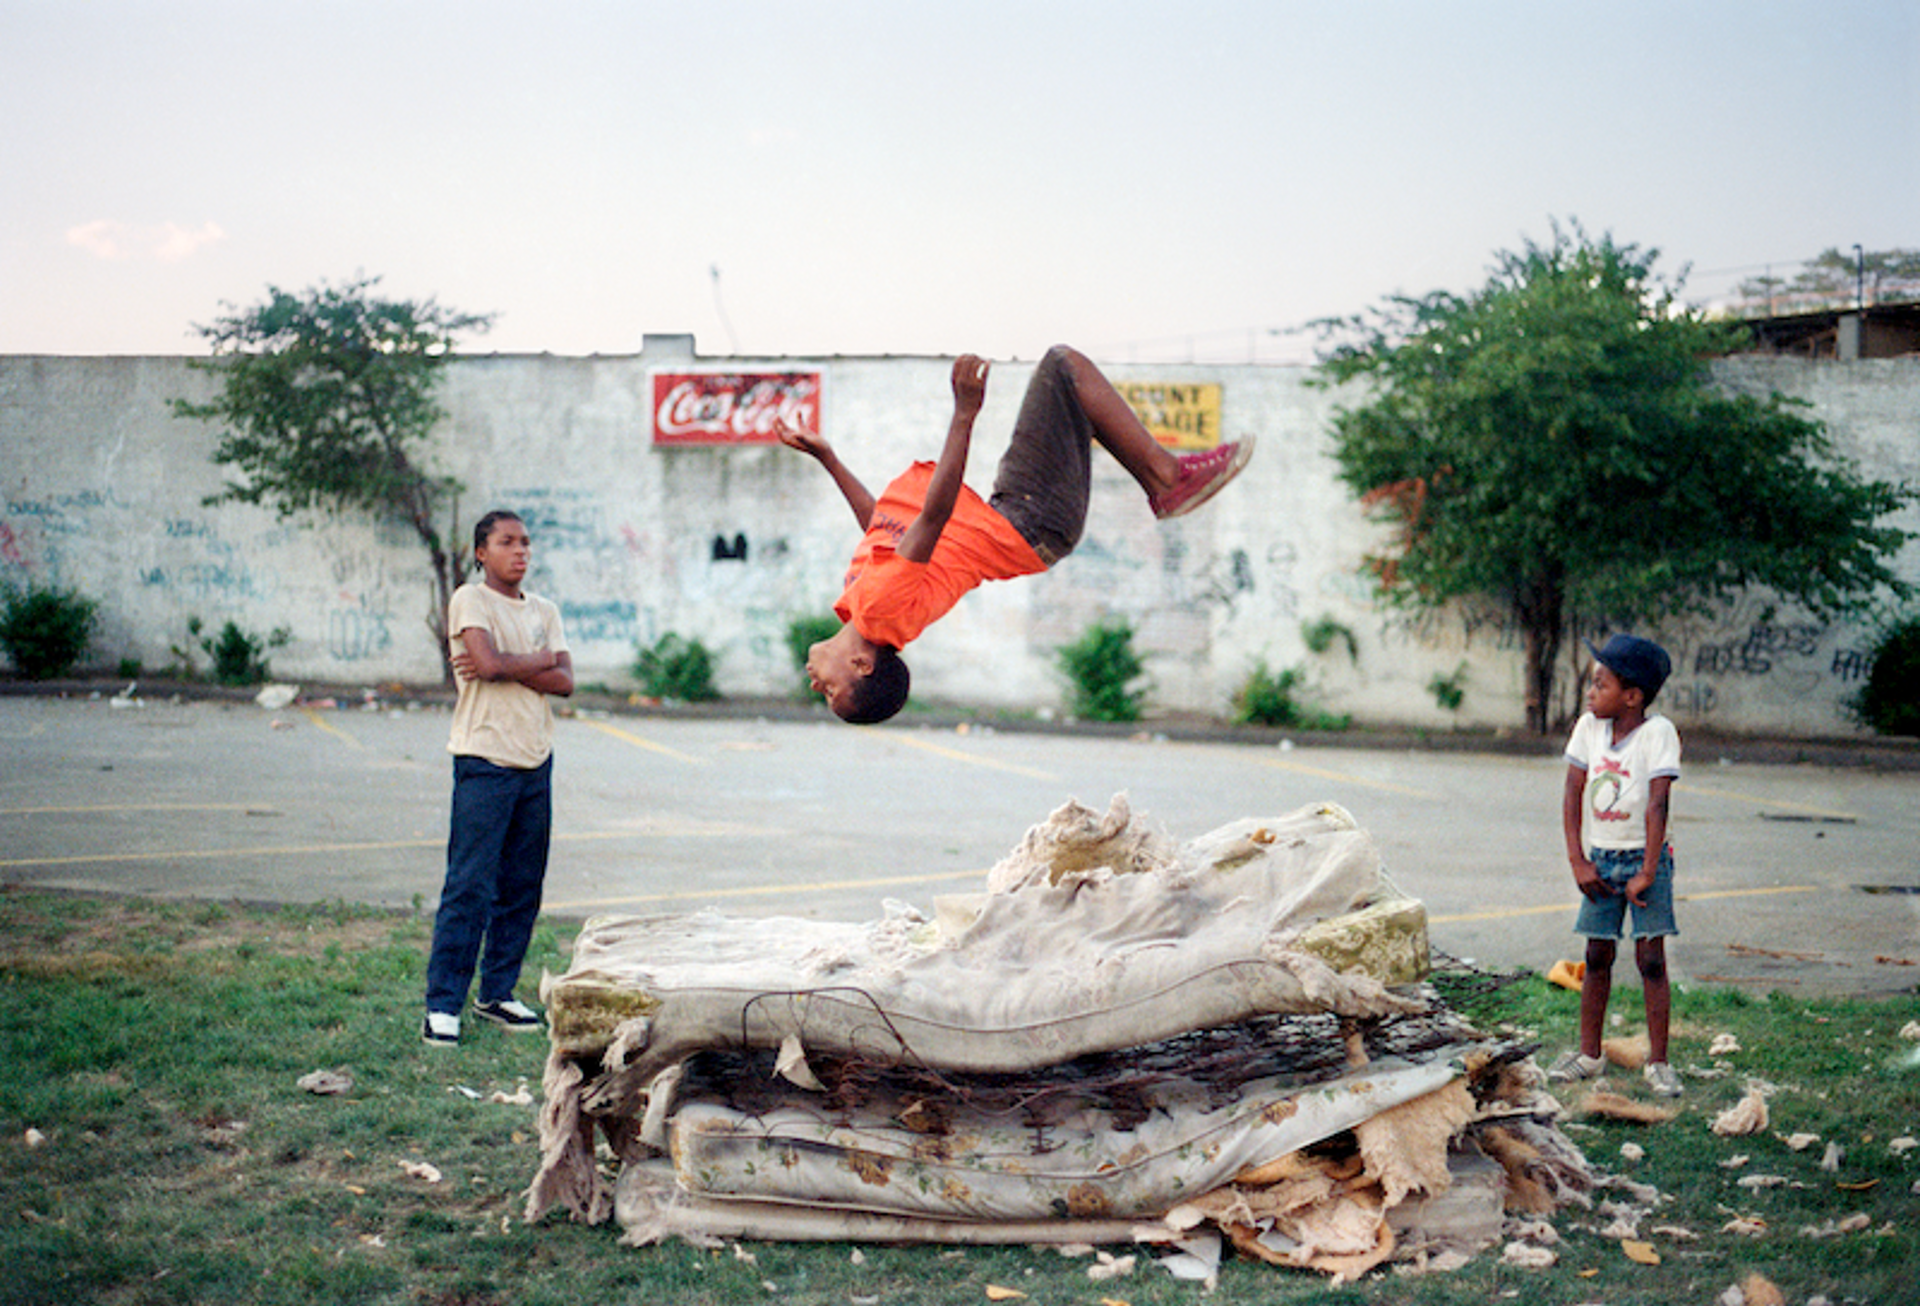 Jamel Shabazz, Flying High, Brownsville, Brooklyn, 1982. Courtesy of the artist.